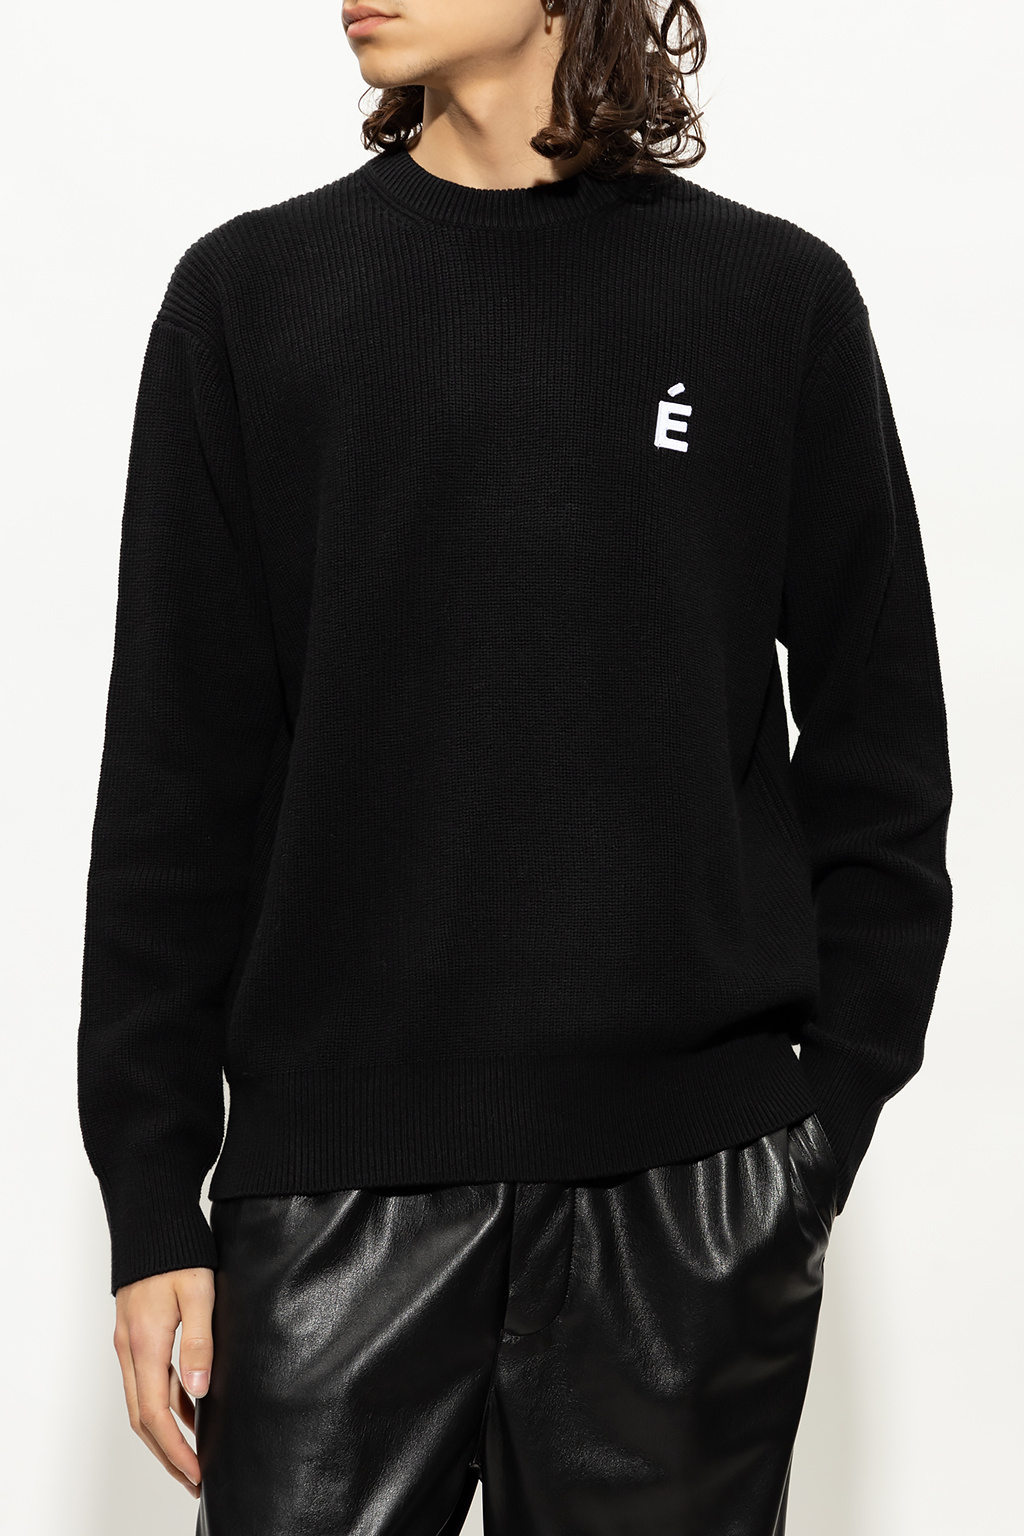 Etudes Ribbed Hooded sweater